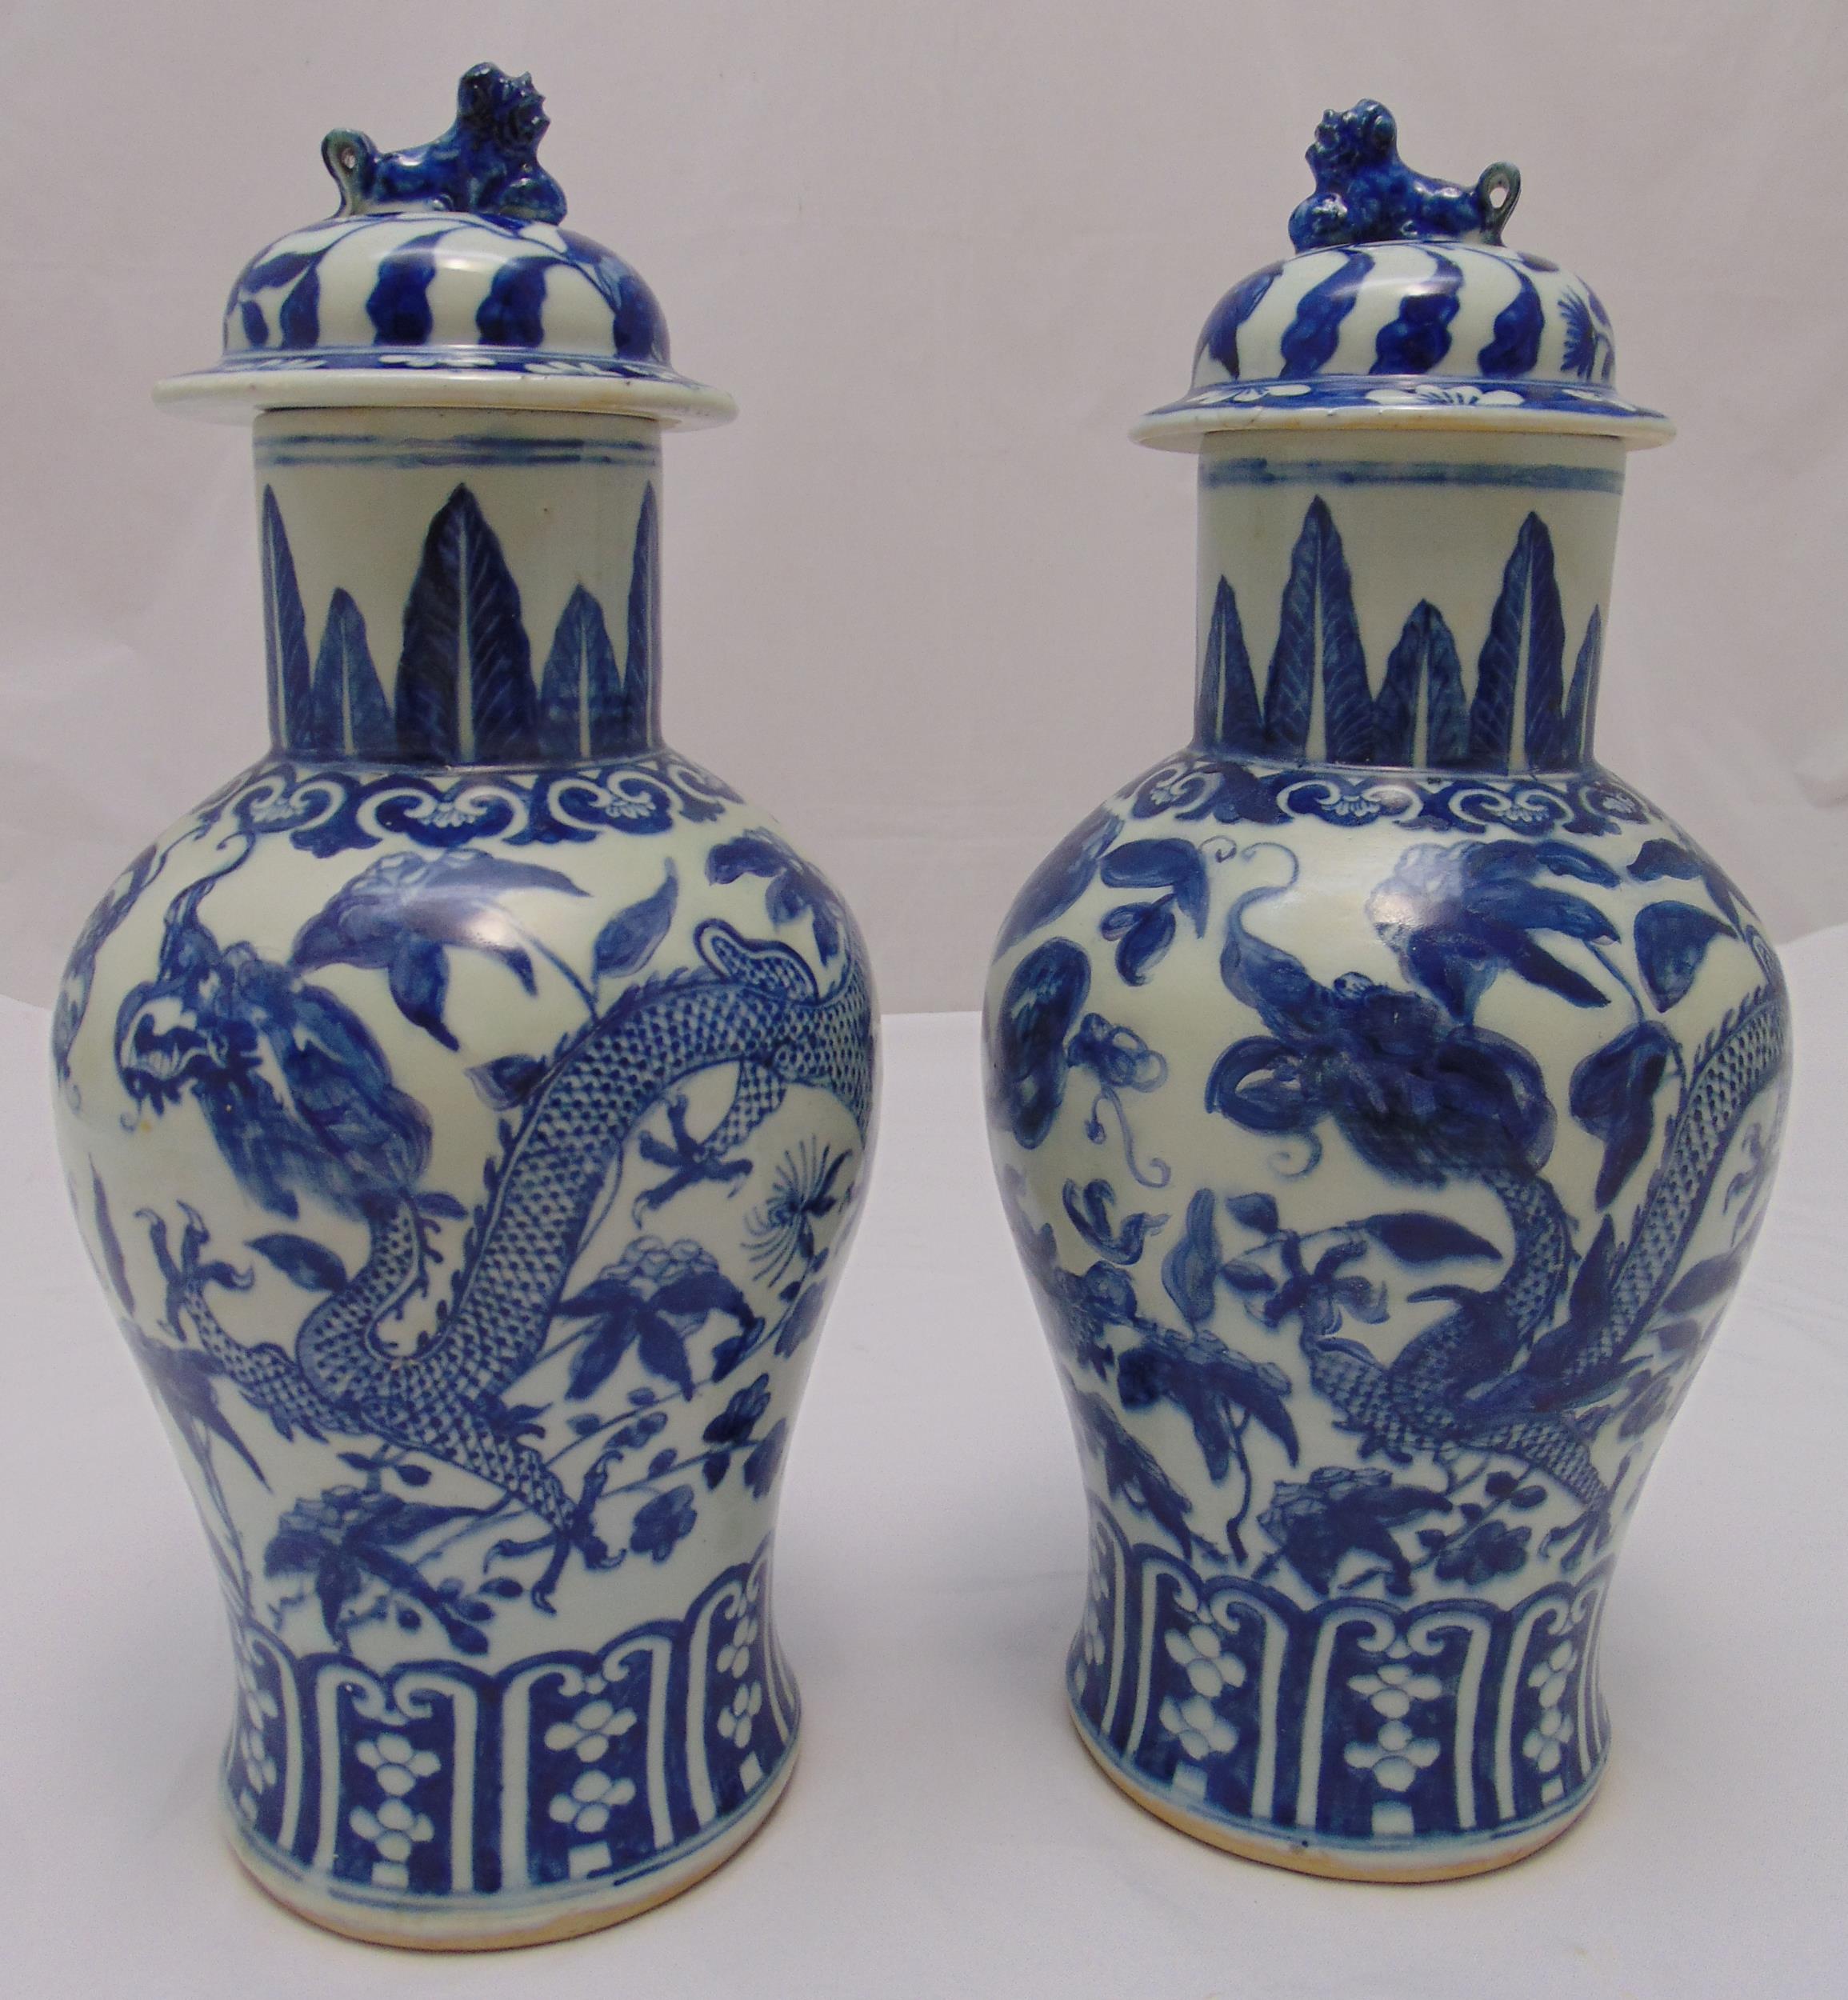 A pair of 19th century style blue & white Chinese baluster vases, the domed pull off covers with